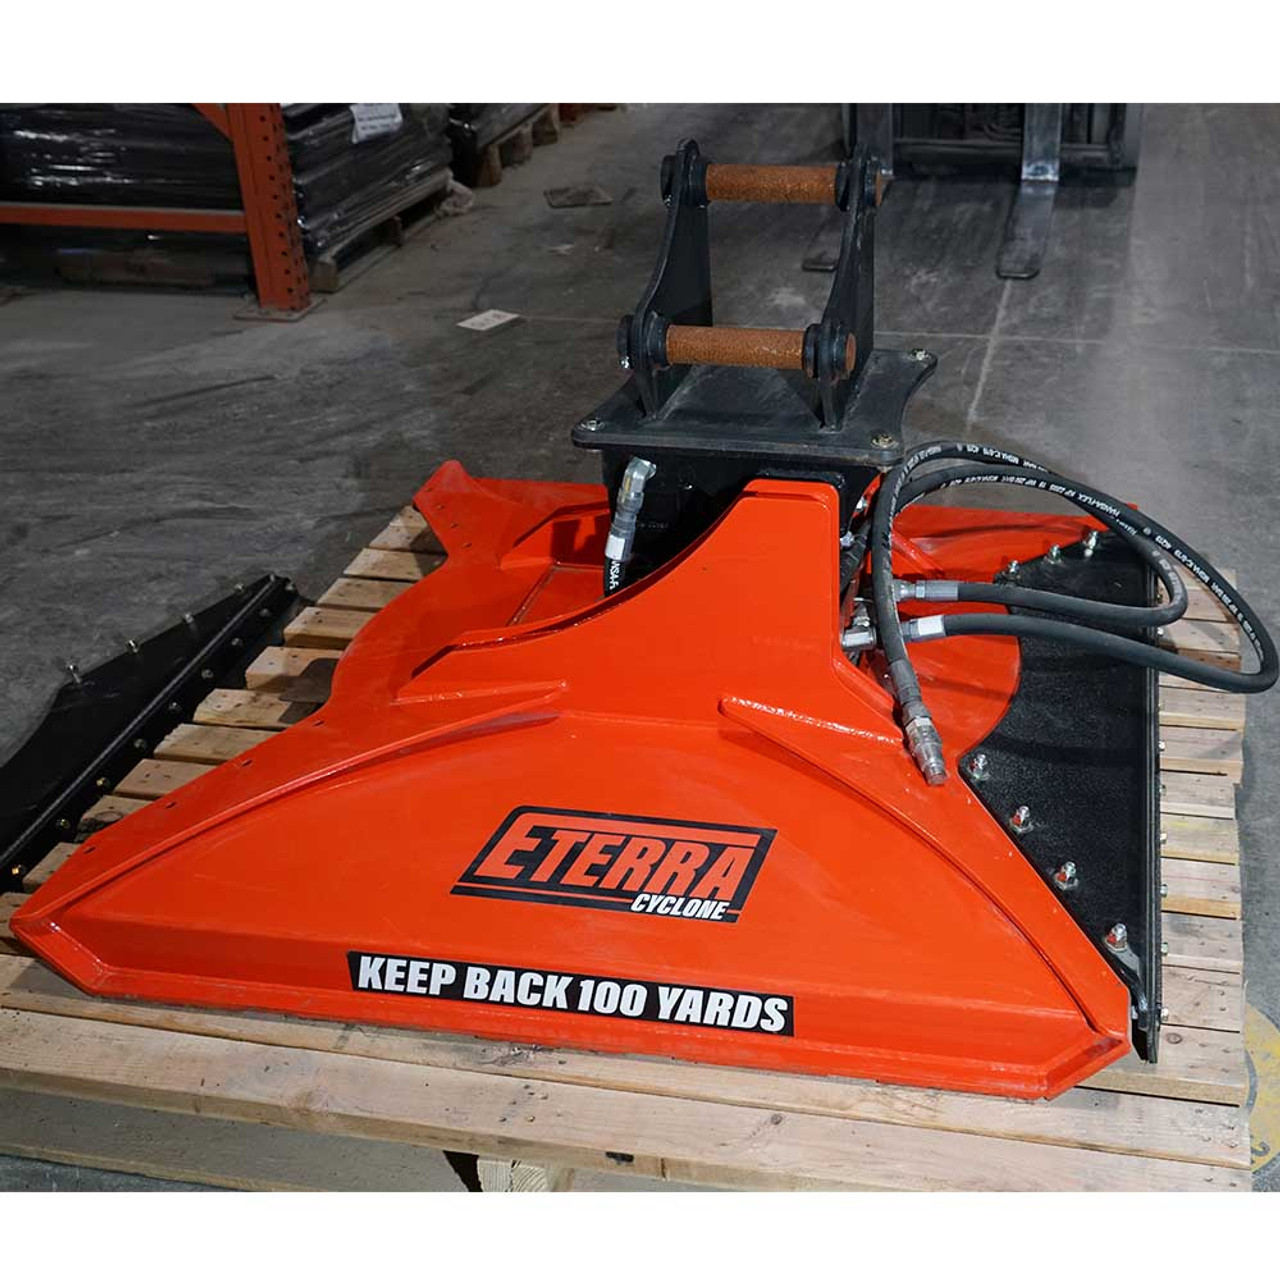 Terac Safety Cutter, Rotary Cutters